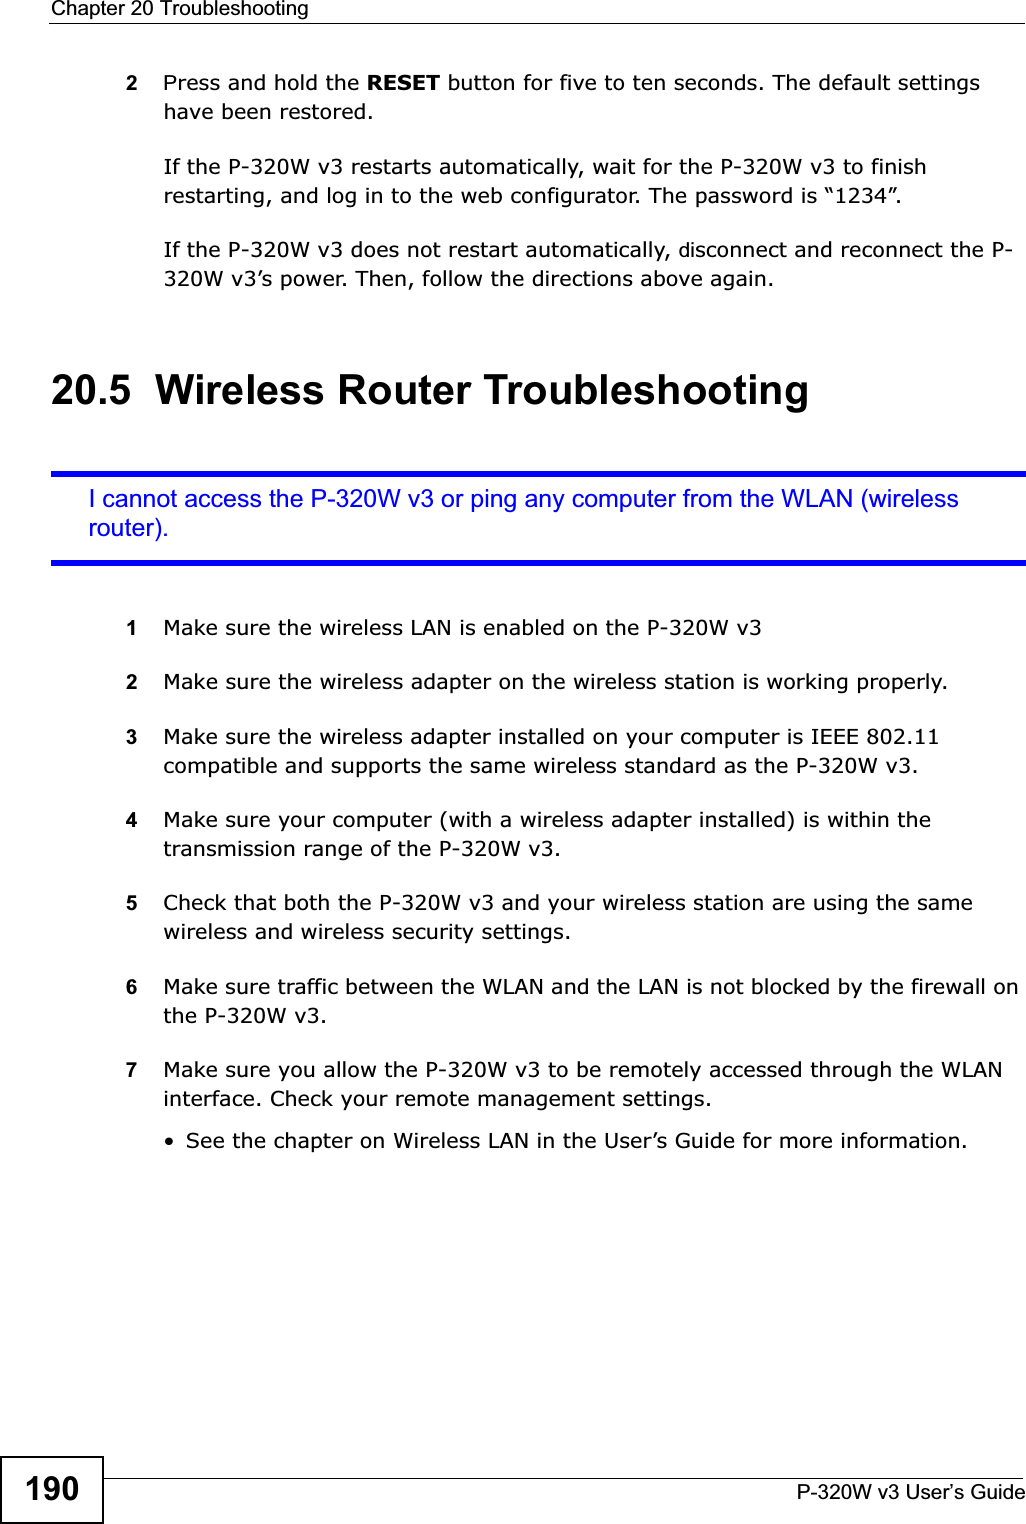 Chapter 20 TroubleshootingP-320W v3 User’s Guide1902Press and hold the RESET button for five to ten seconds. The default settings have been restored.If the P-320W v3 restarts automatically, wait for the P-320W v3 to finish restarting, and log in to the web configurator. The password is “1234”.If the P-320W v3 does not restart automatically, disconnect and reconnect the P-320W v3’s power. Then, follow the directions above again.20.5  Wireless Router TroubleshootingI cannot access the P-320W v3 or ping any computer from the WLAN (wireless router).1Make sure the wireless LAN is enabled on the P-320W v32Make sure the wireless adapter on the wireless station is working properly.3Make sure the wireless adapter installed on your computer is IEEE 802.11 compatible and supports the same wireless standard as the P-320W v3.4Make sure your computer (with a wireless adapter installed) is within the transmission range of the P-320W v3.5Check that both the P-320W v3 and your wireless station are using the same wireless and wireless security settings.6Make sure traffic between the WLAN and the LAN is not blocked by the firewall on the P-320W v3. 7Make sure you allow the P-320W v3 to be remotely accessed through the WLAN interface. Check your remote management settings.• See the chapter on Wireless LAN in the User’s Guide for more information.